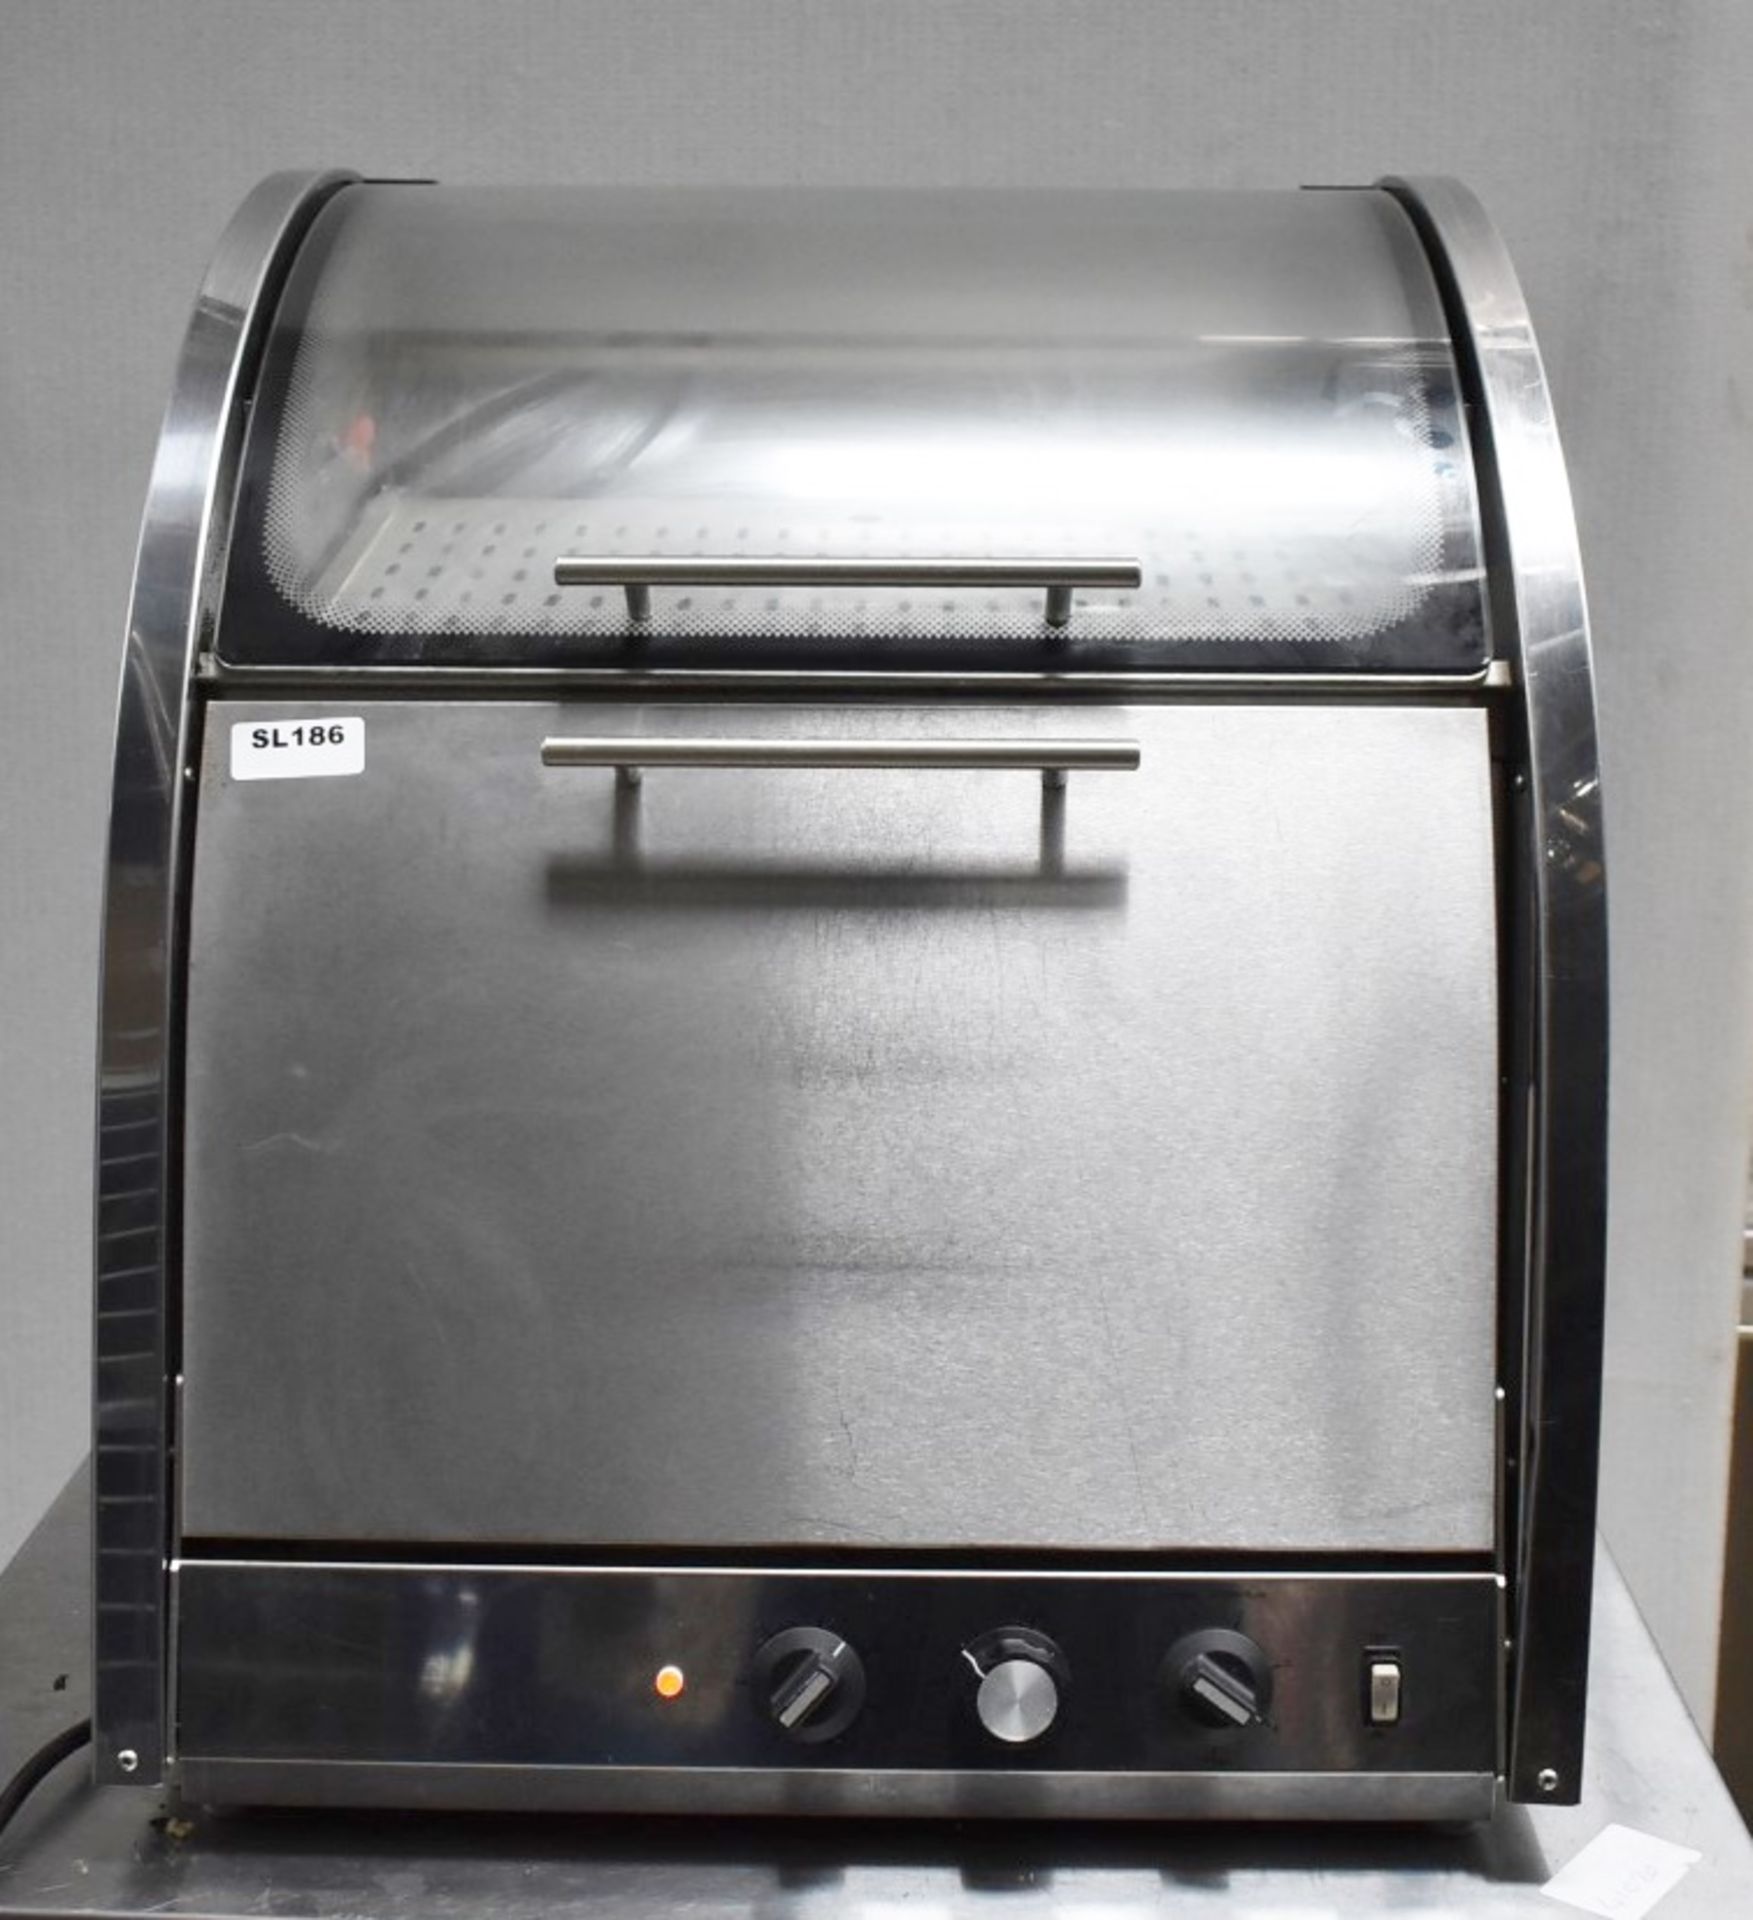 1 x Countertop Oven With Food Warmer Display - Dimensions: H63 x W55 x D56 cms - Recently Removed - Image 12 of 14